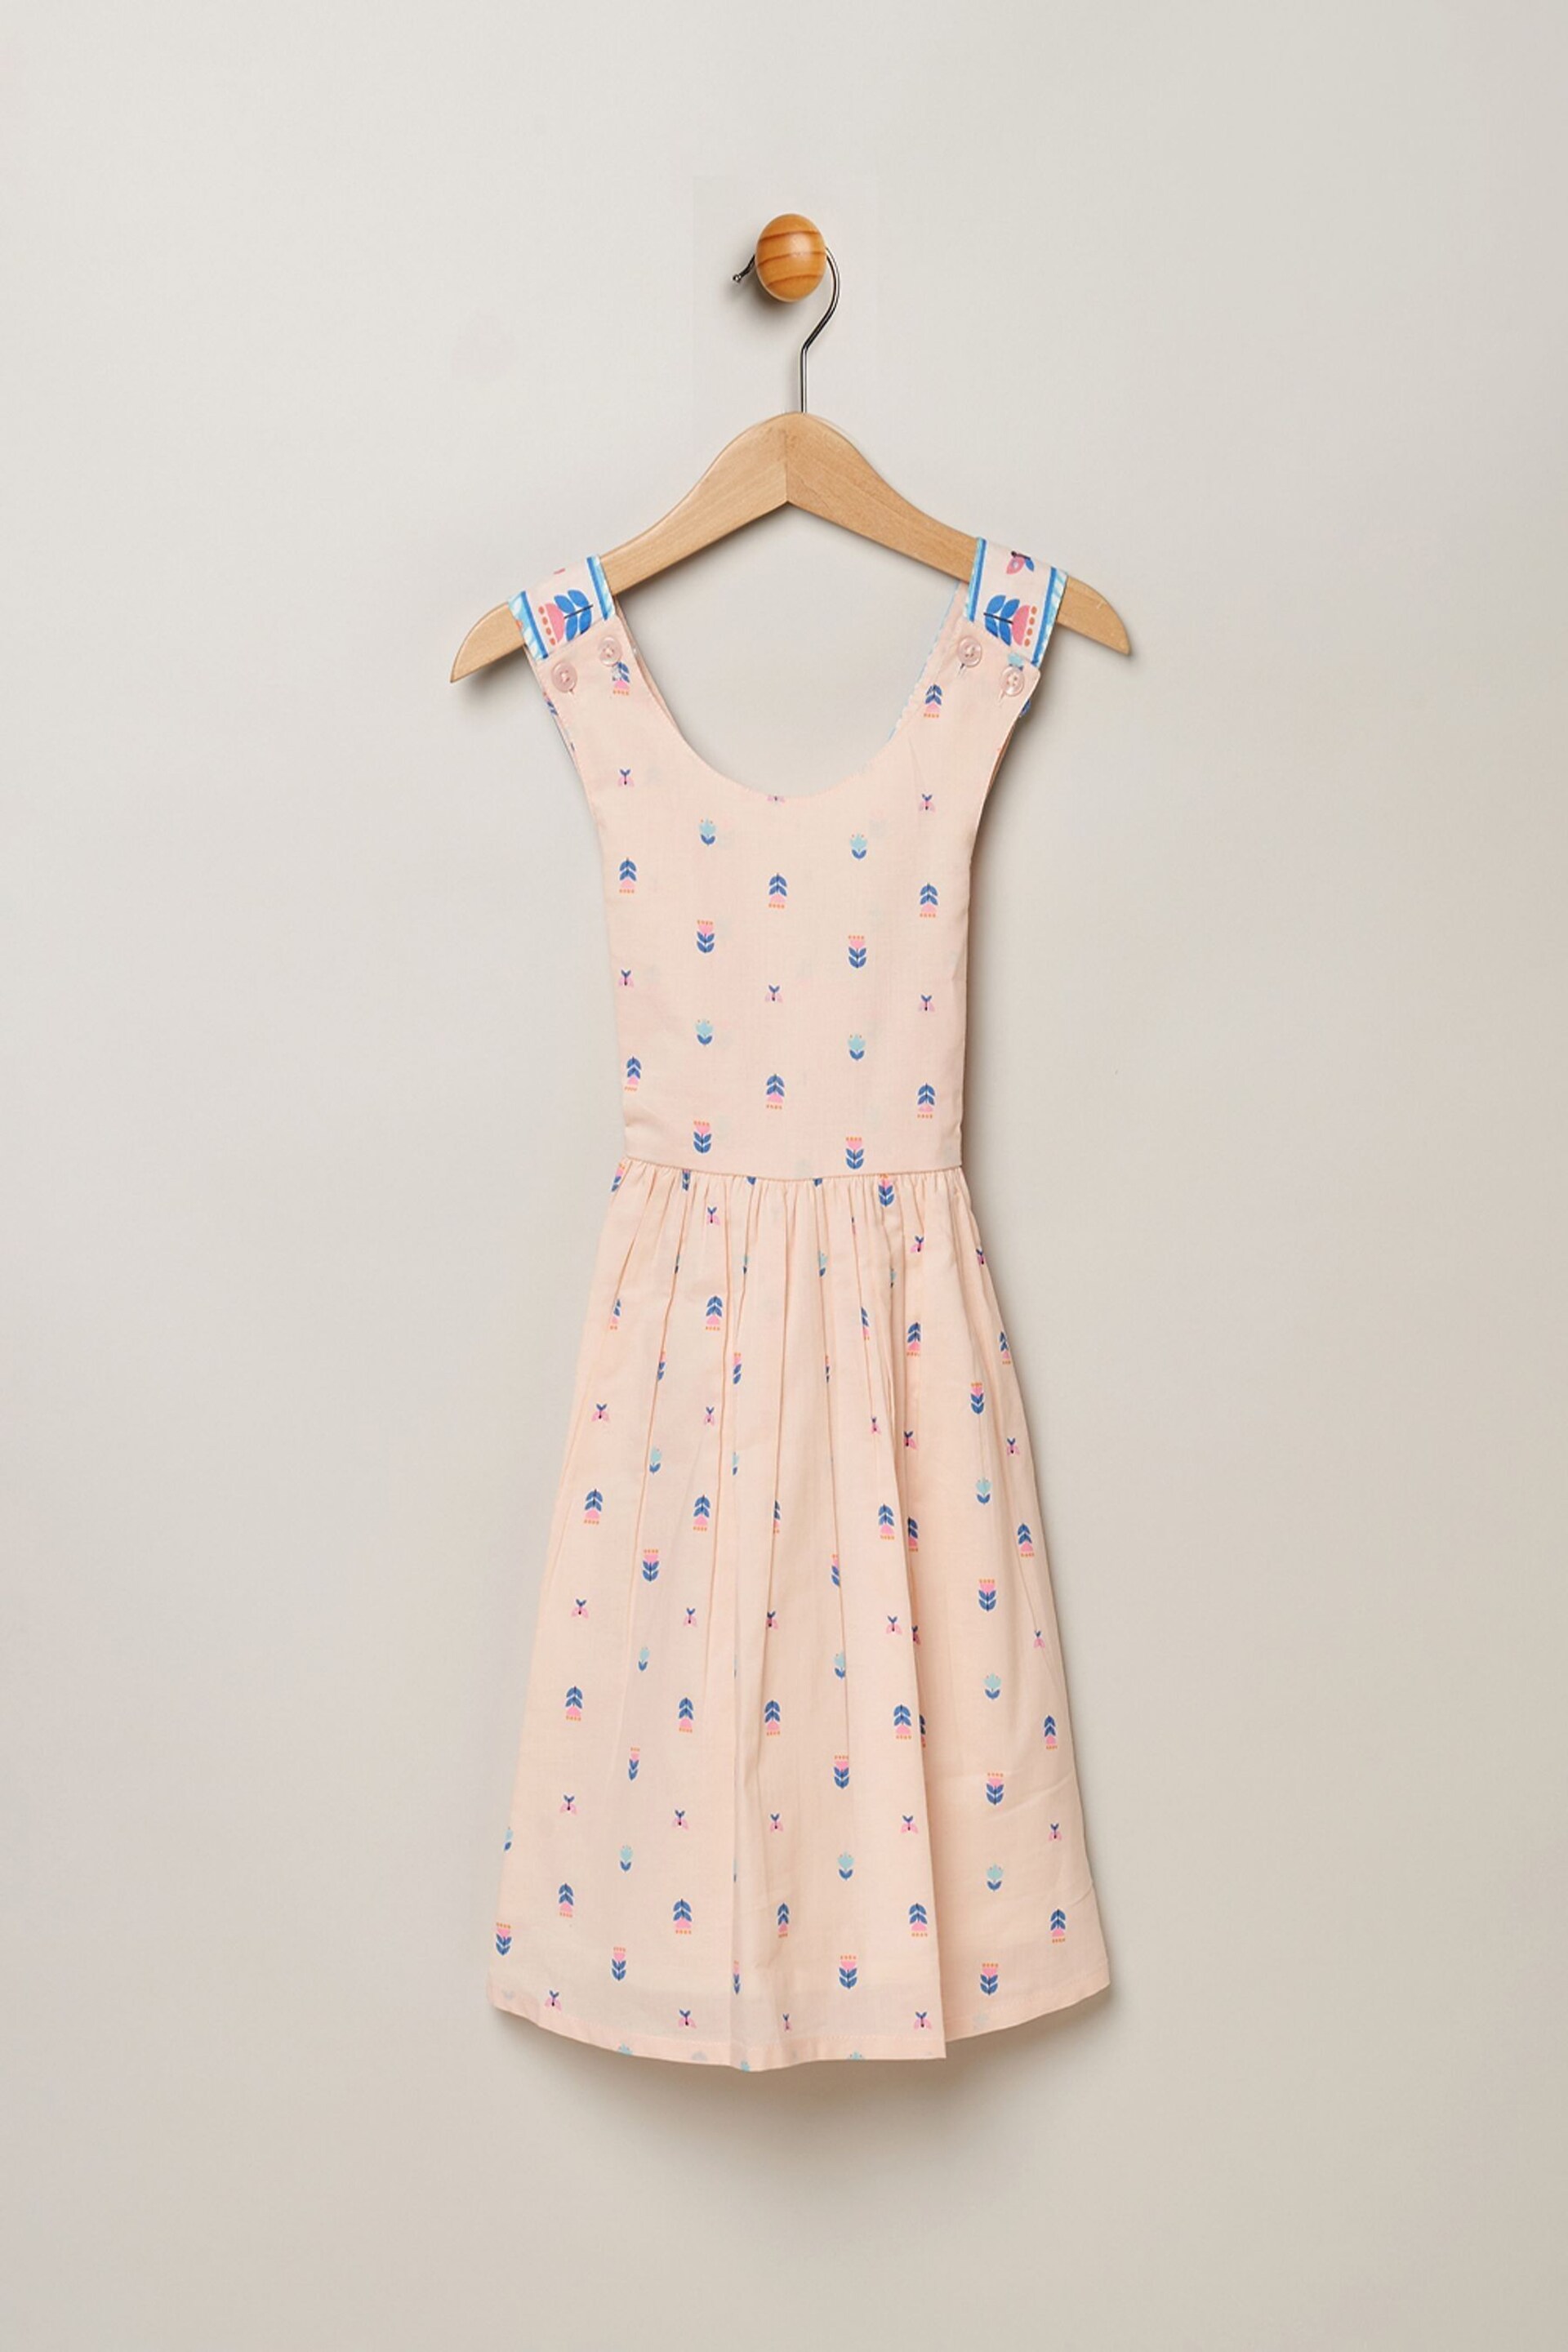 Miss Pink Skater Dress With Cross-Over Straps - Image 1 of 3